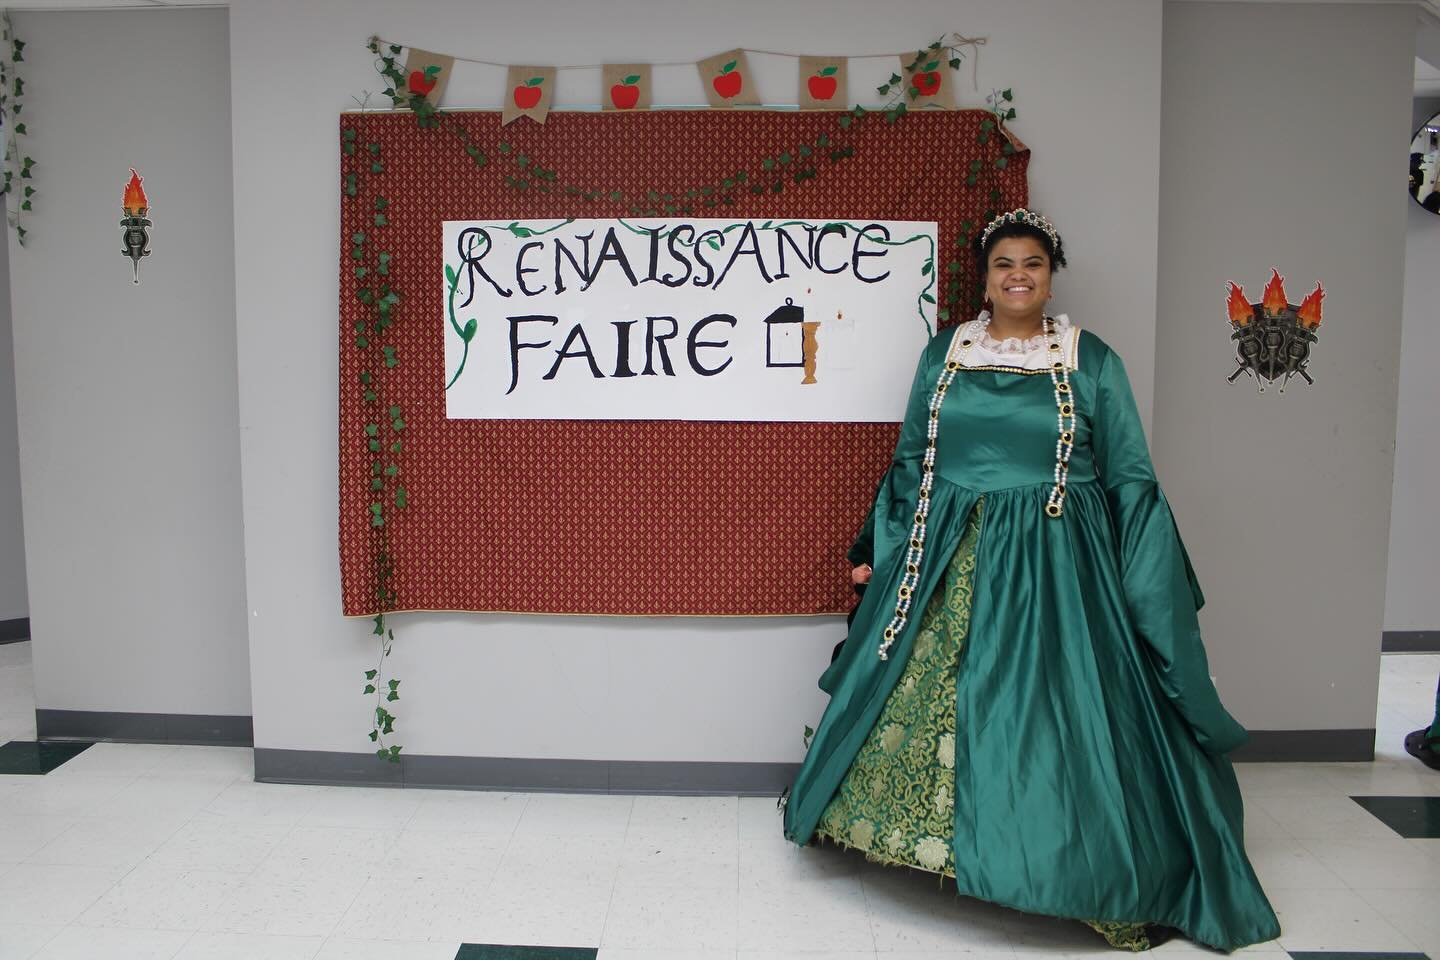 The Renaissance Faire was today and the 6th grade students had such a fun time showcasing their hard work and informing other students and families!

There were over 40 booths focused on various Renaissance topics like Art & Culture, Health, Weap